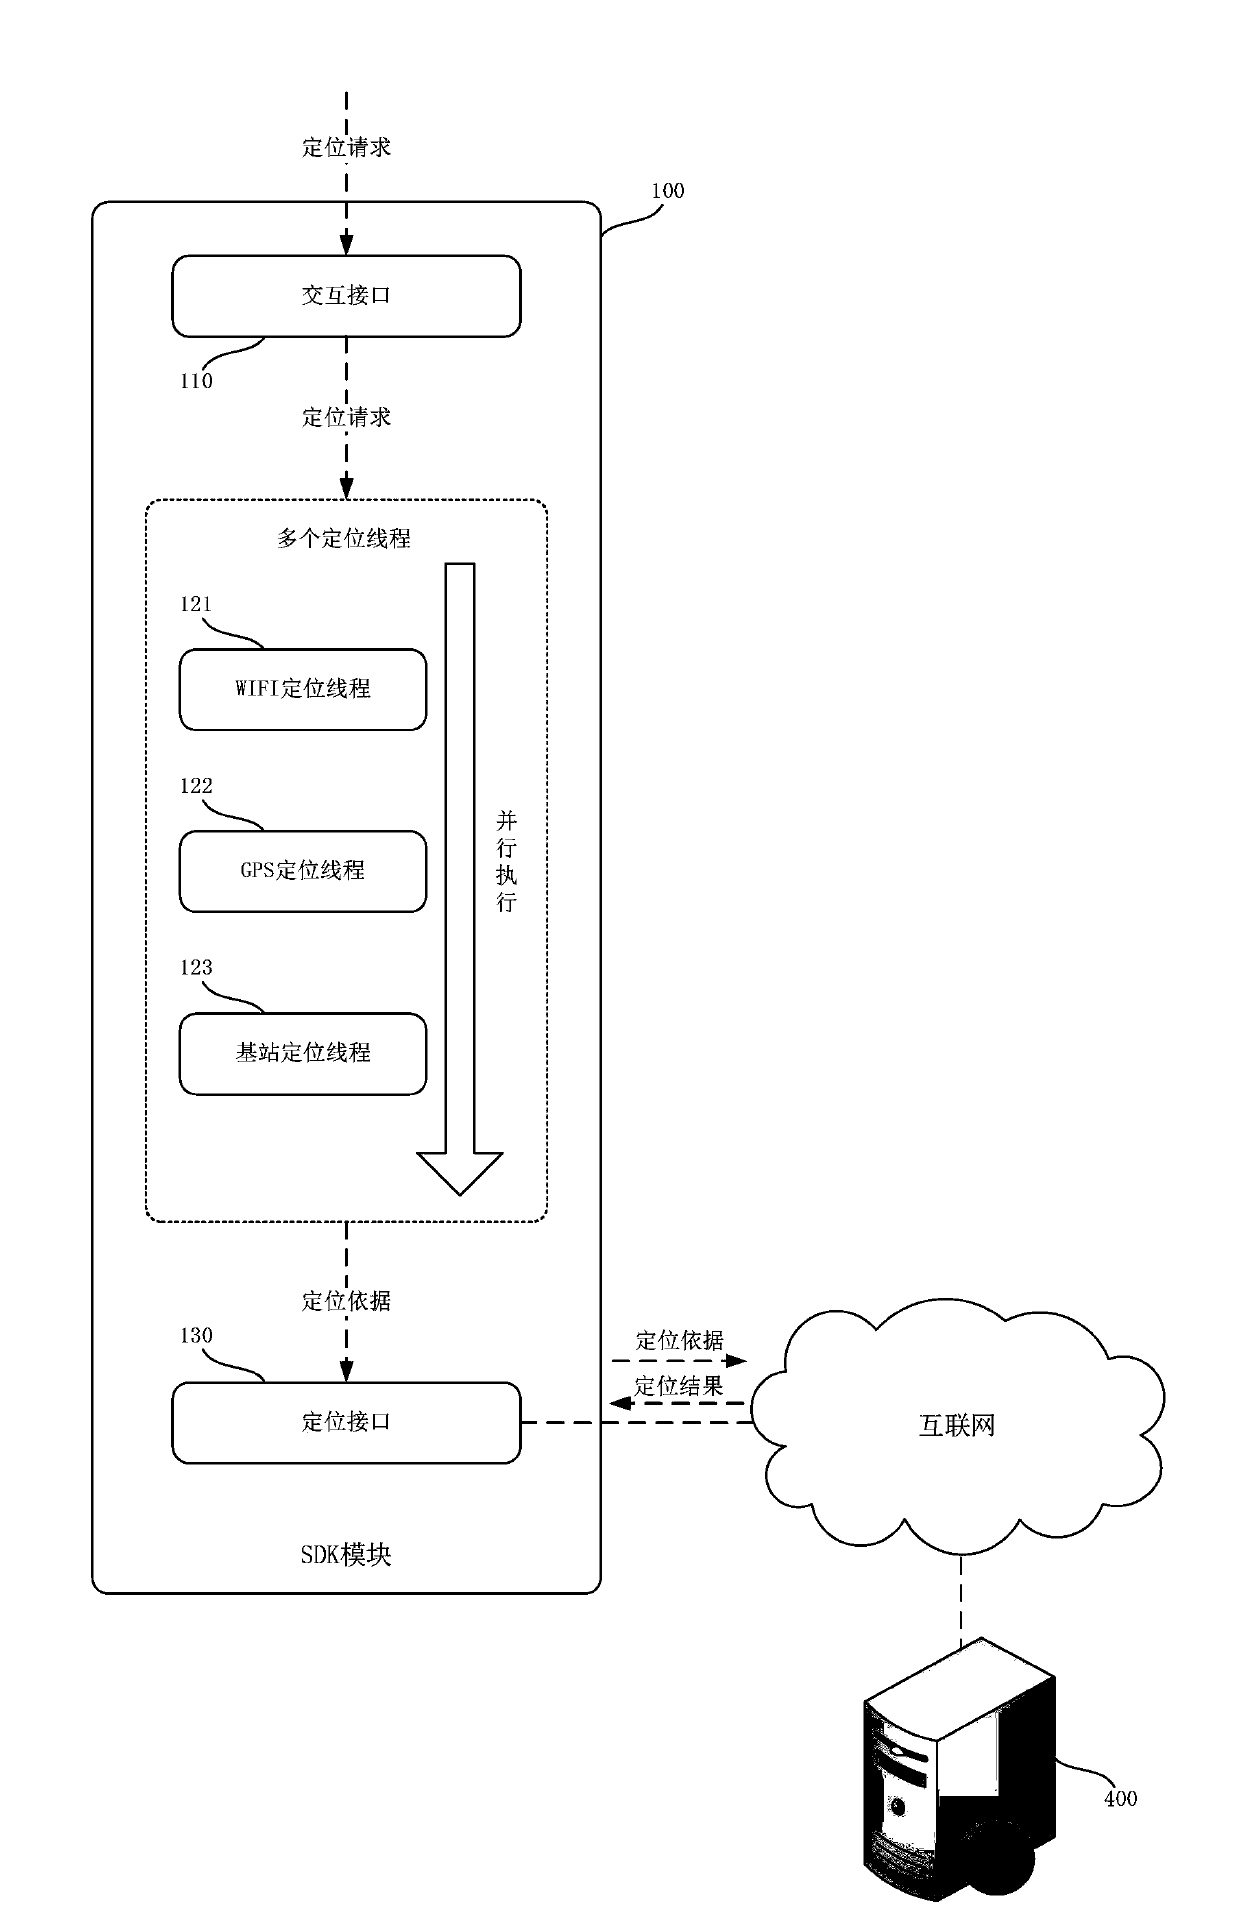 Method for realizing positioning server at mobile terminal and software development kit module